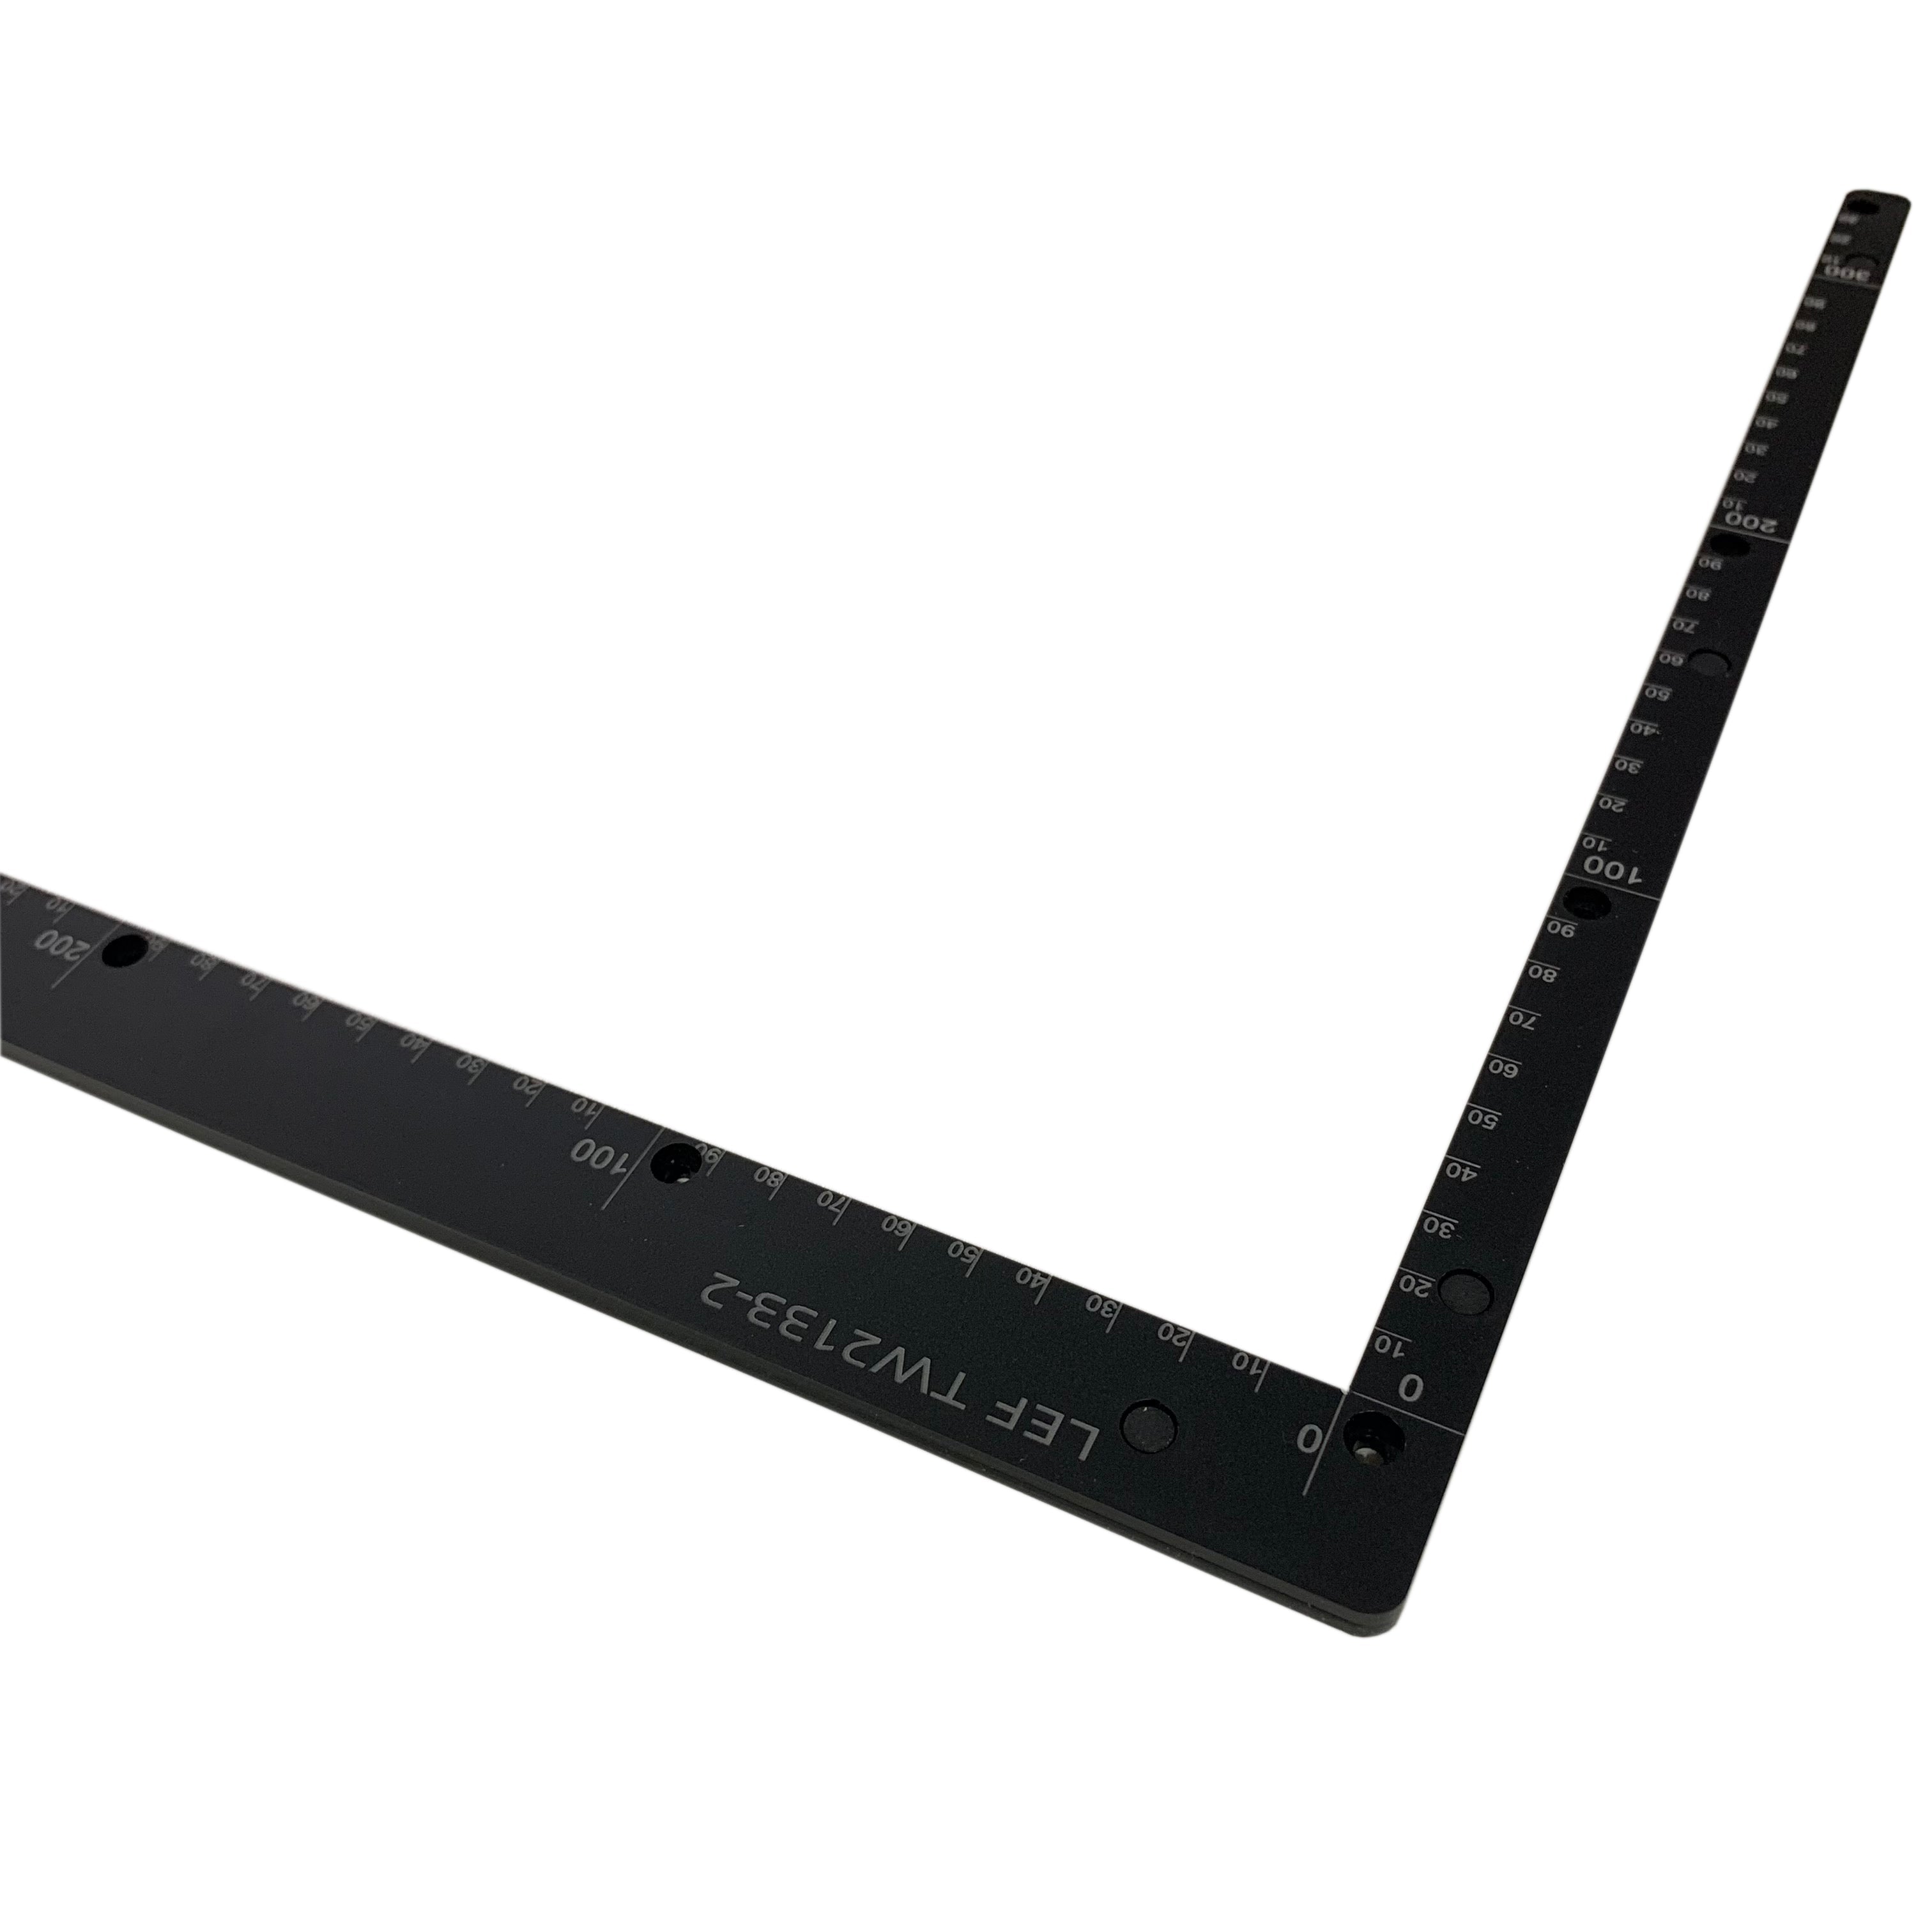 Ruler Printing Guide for Roland MO-240 Flatbed Printer